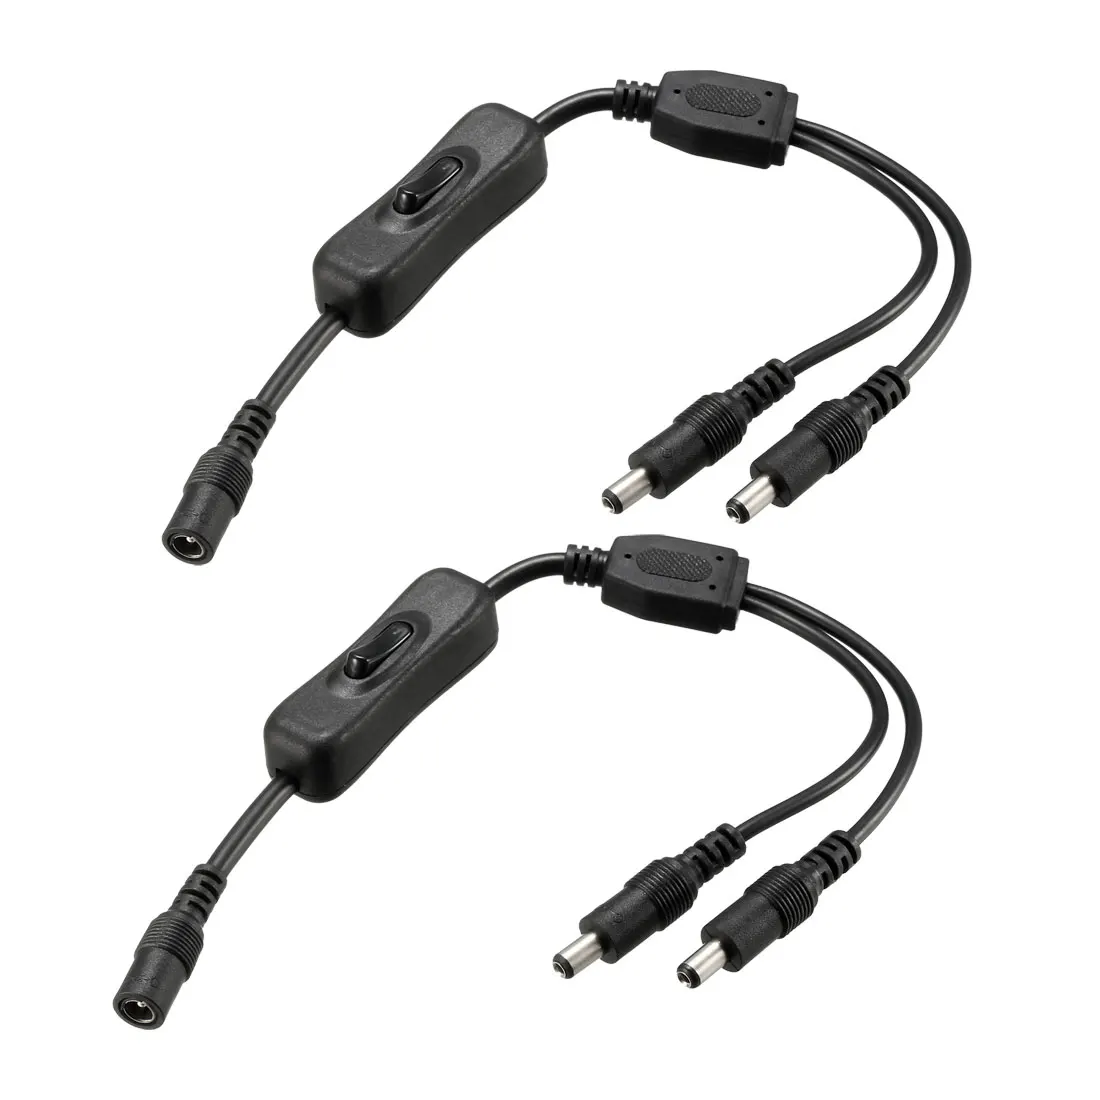 uxcell 2Pcs DC Power Splitter with Switch 1 Female to 2 Male 5.5mm x 2.1mm Y Adapter Cable for CCTV Camera LED Strip Light